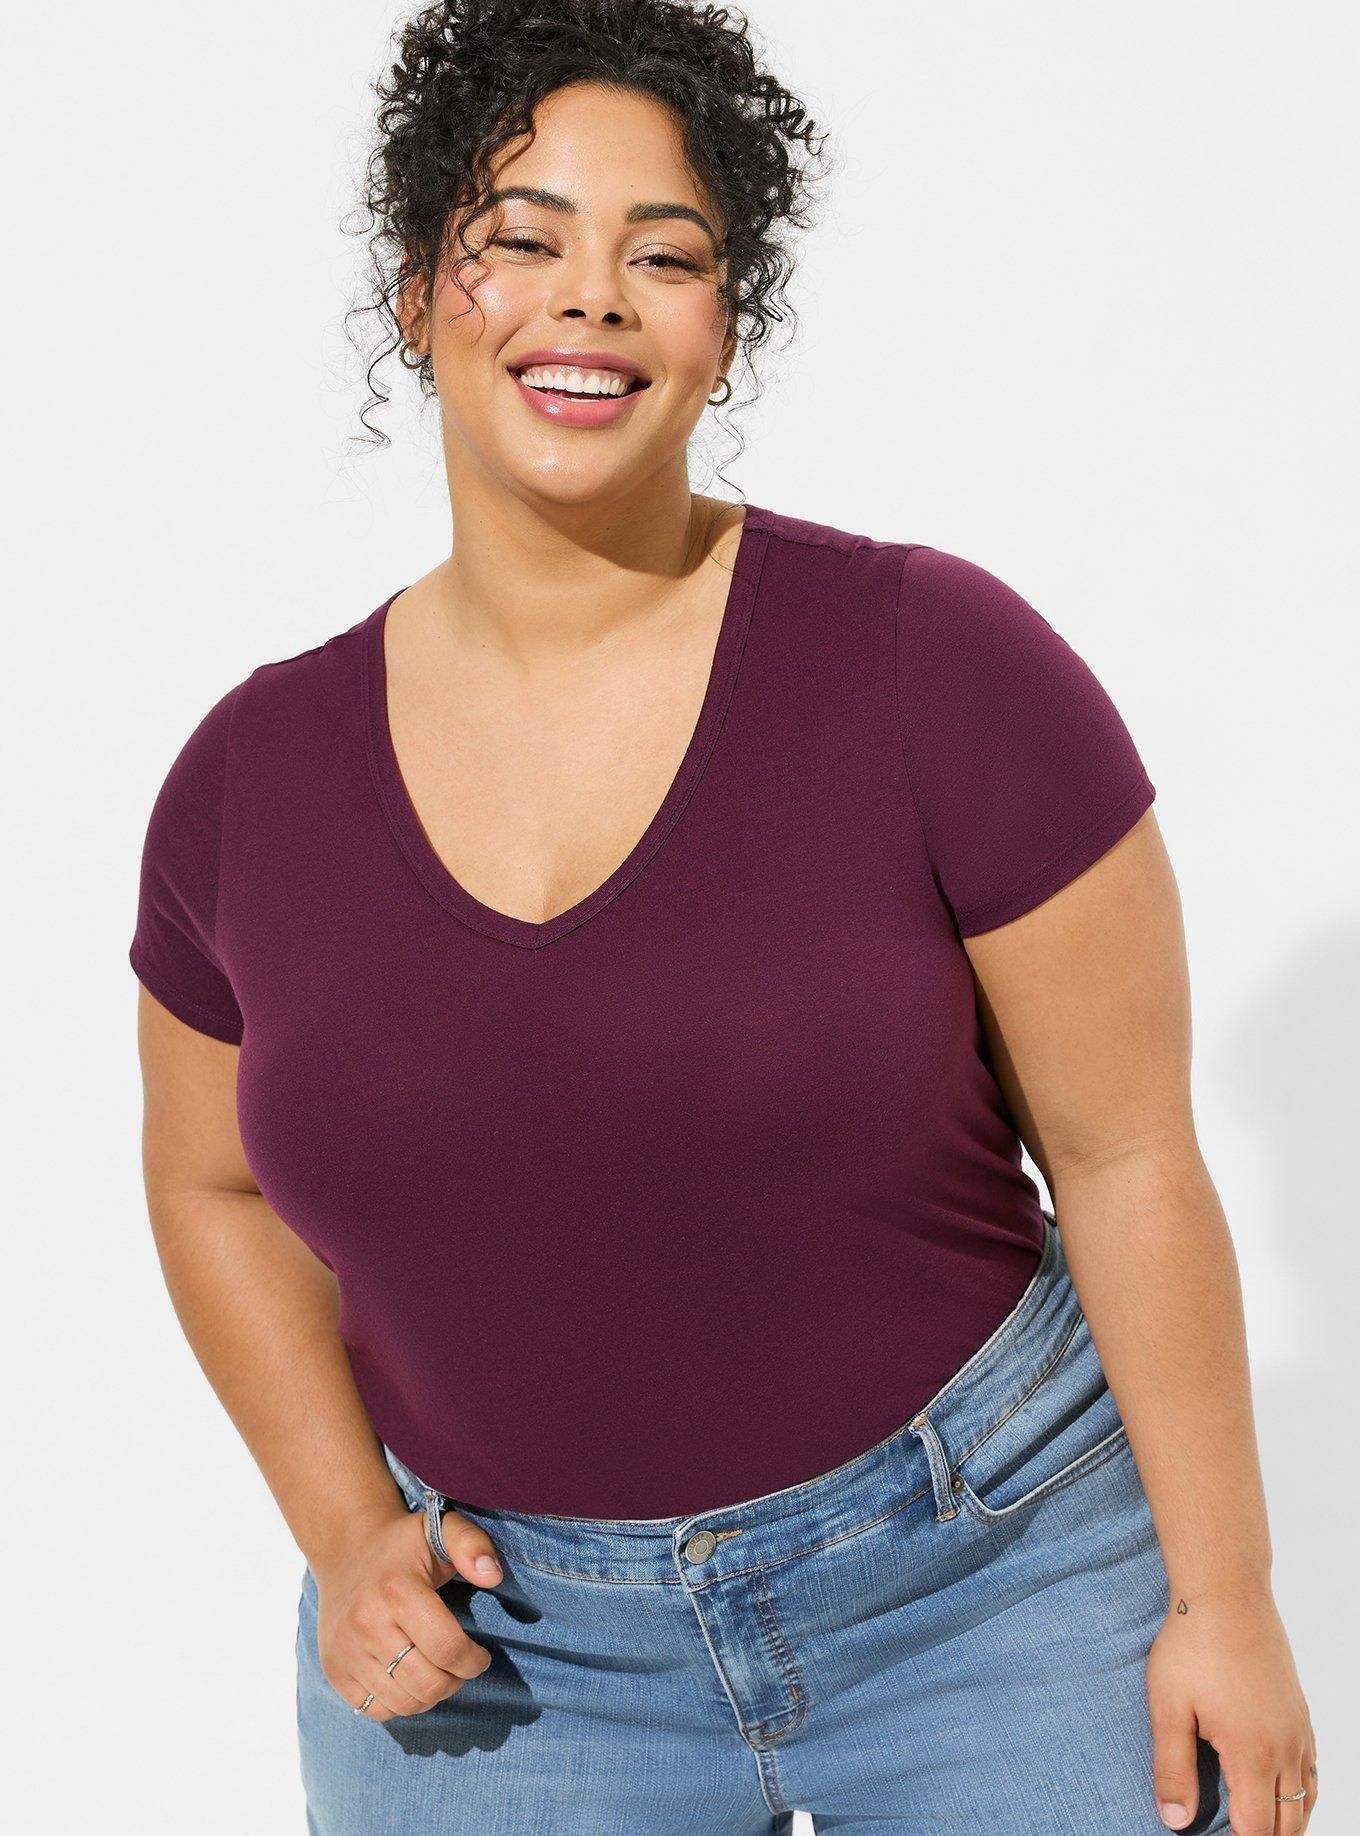 SHOWMALL Plus Size Clothes for Women Cold Shoulder Top Burgundy 5X Blouse  Short Sleeve Clothing V Neck Tunic Summer Shirts